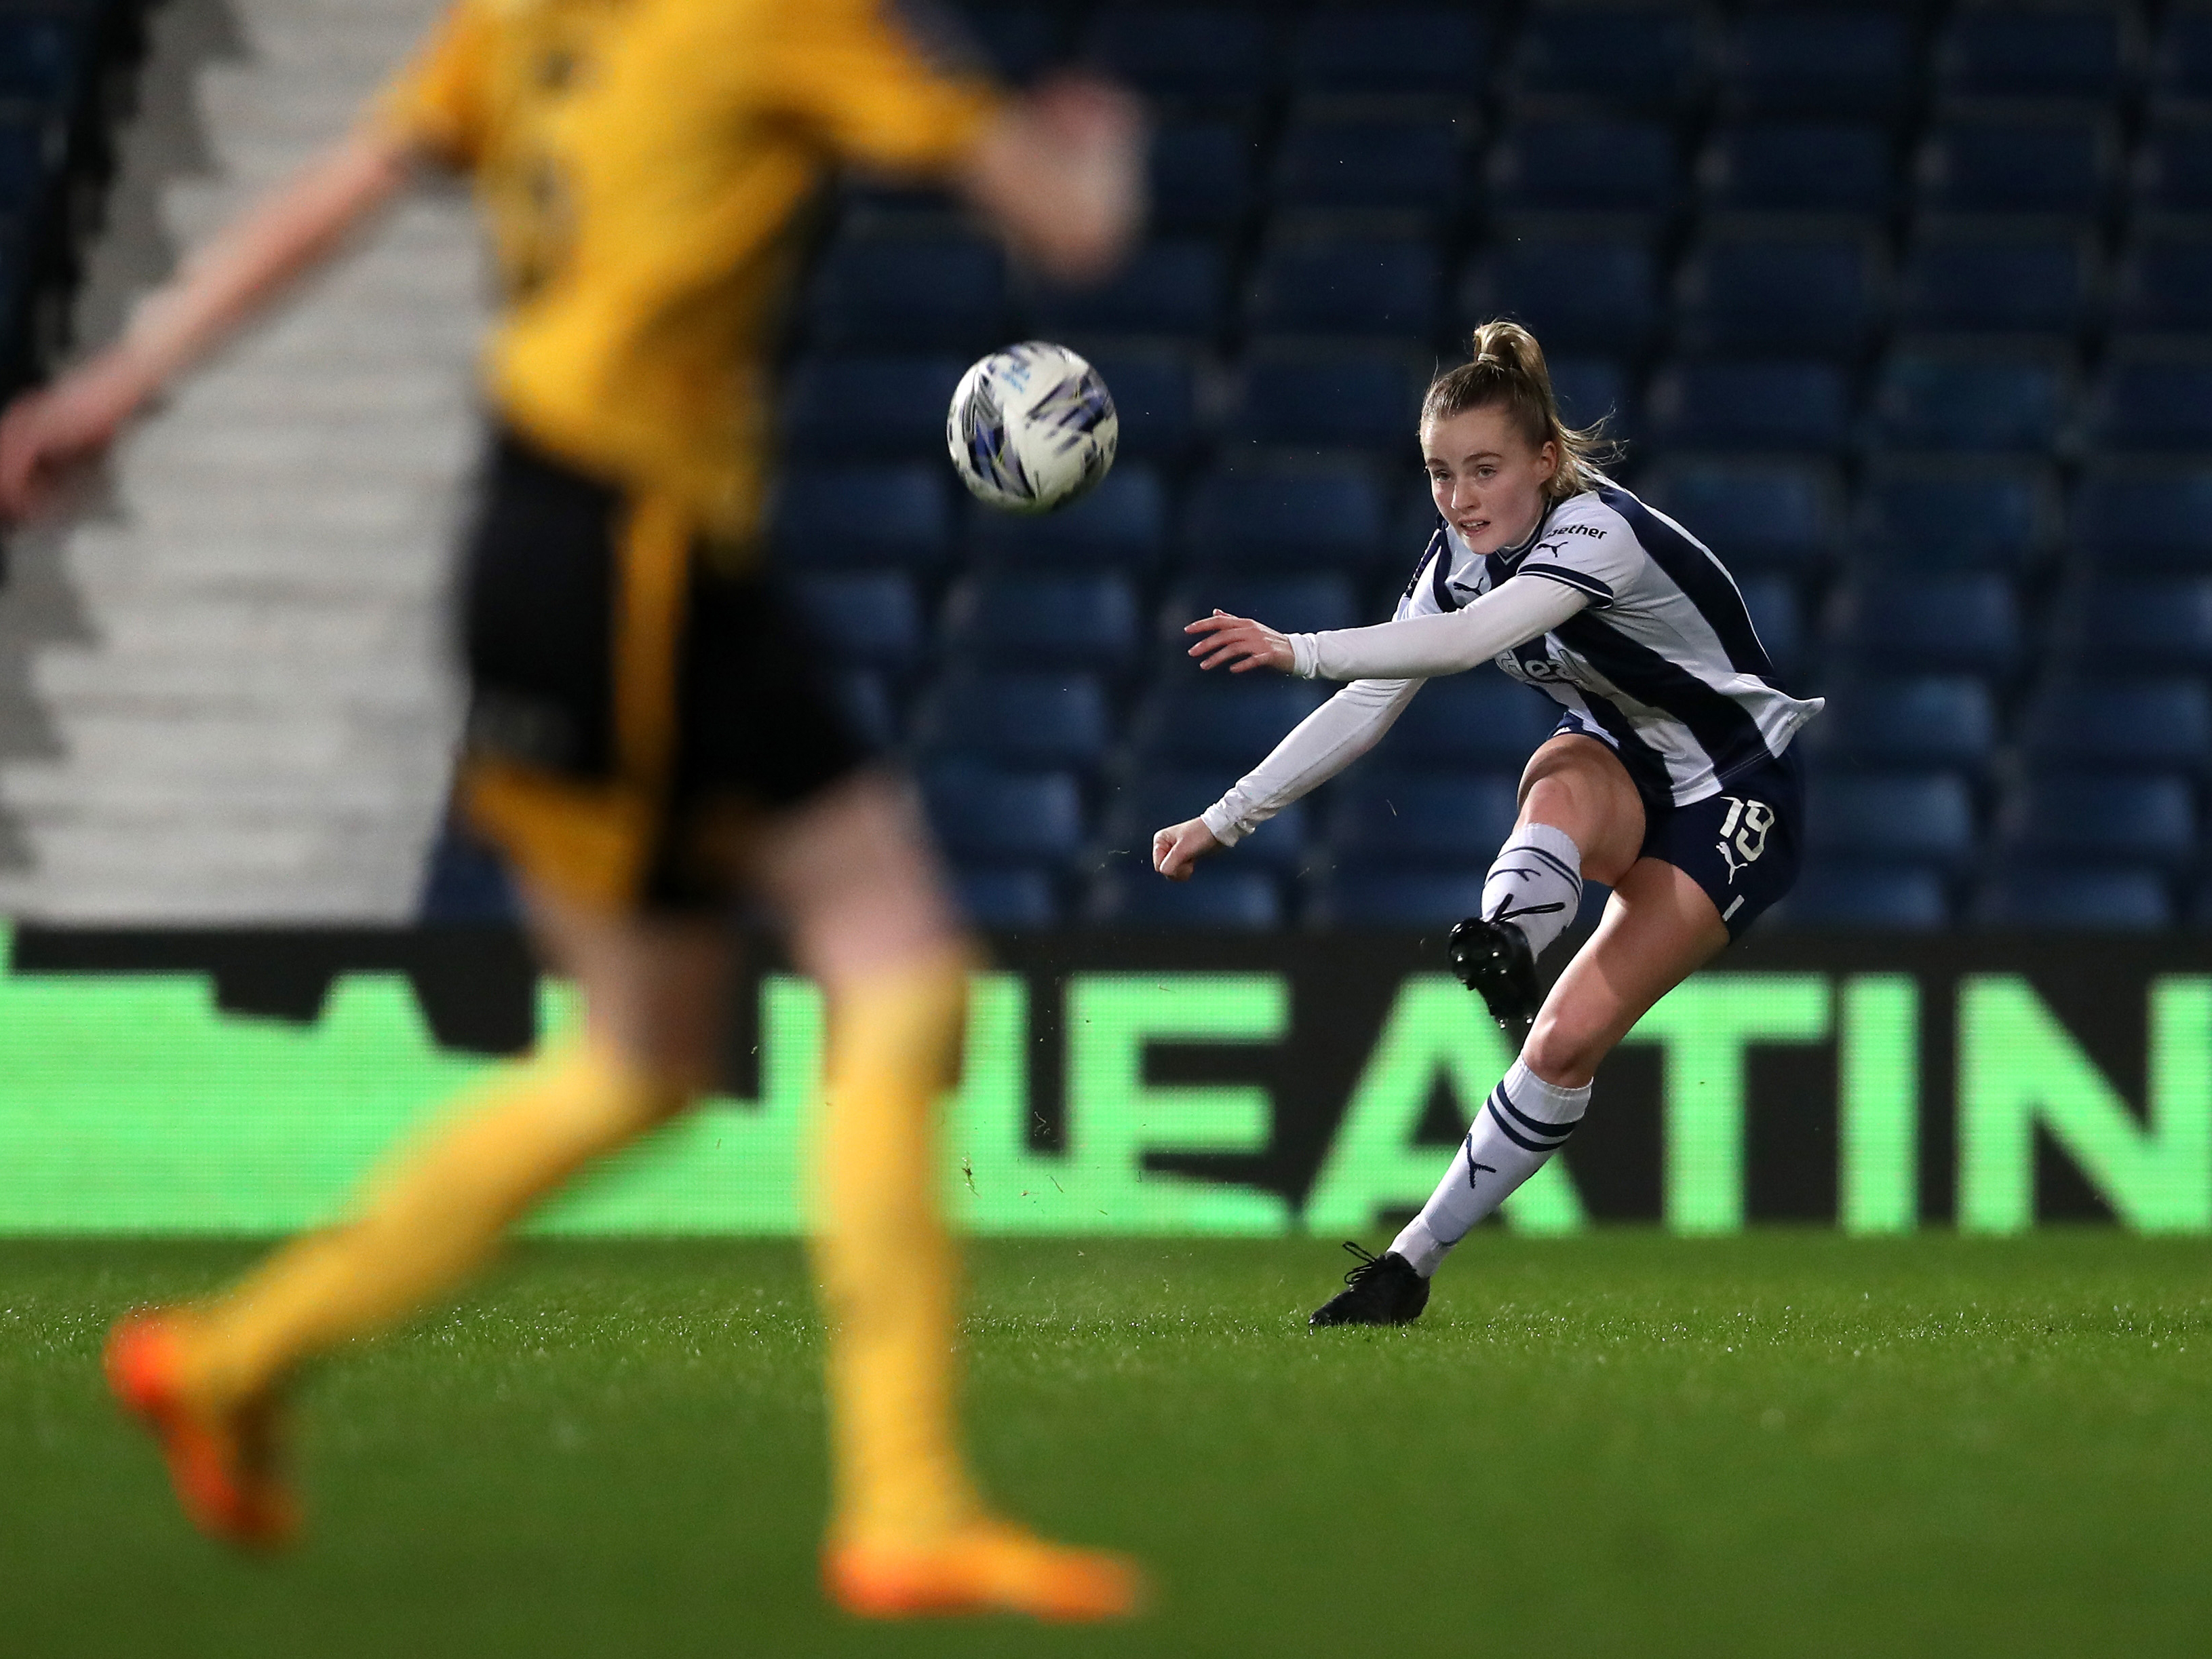 An image of Albion Women player Maria Timms passing the ball